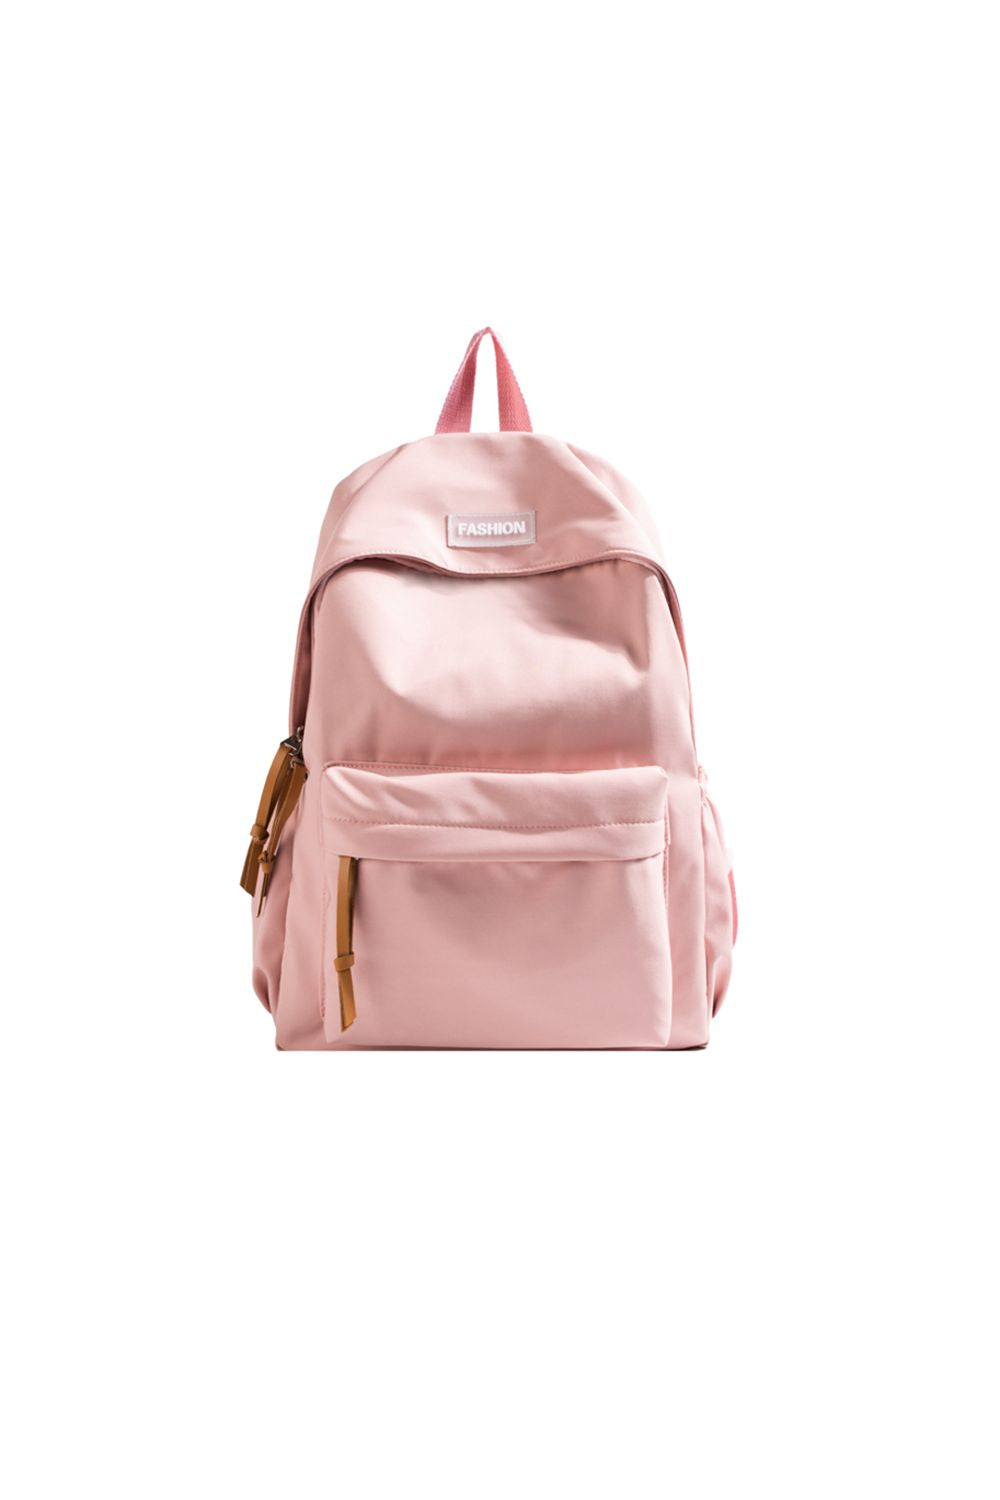 TranquilNights FASHION Polyester Backpack